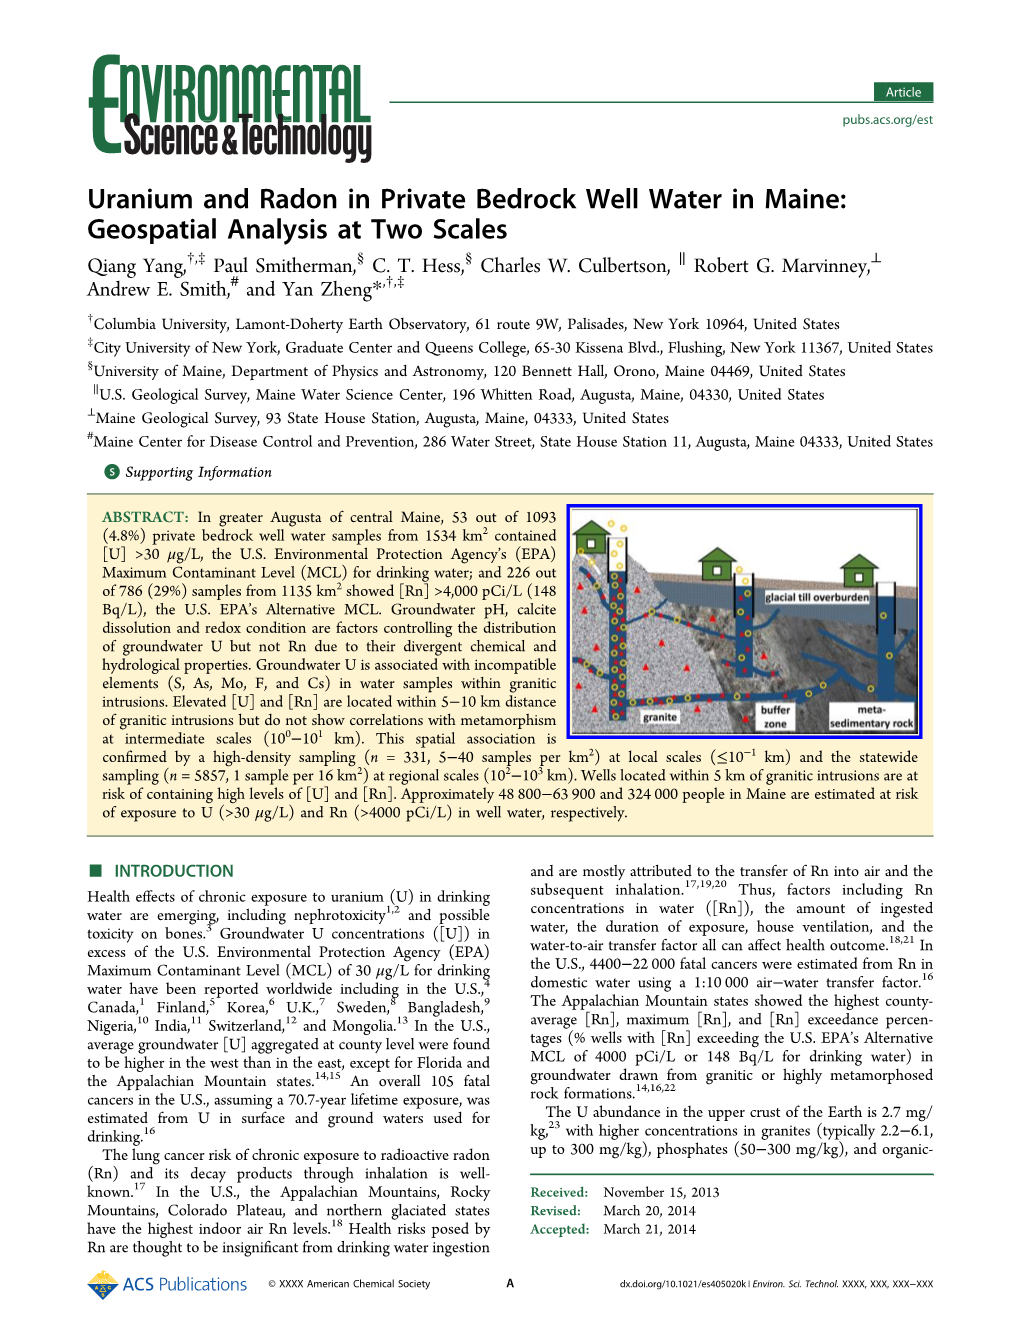 Uranium and Radon in Private Bedrock Well Water in Maine: Geospatial Analysis at Two Scales † ‡ § § ∥ ⊥ Qiang Yang, , Paul Smitherman, C